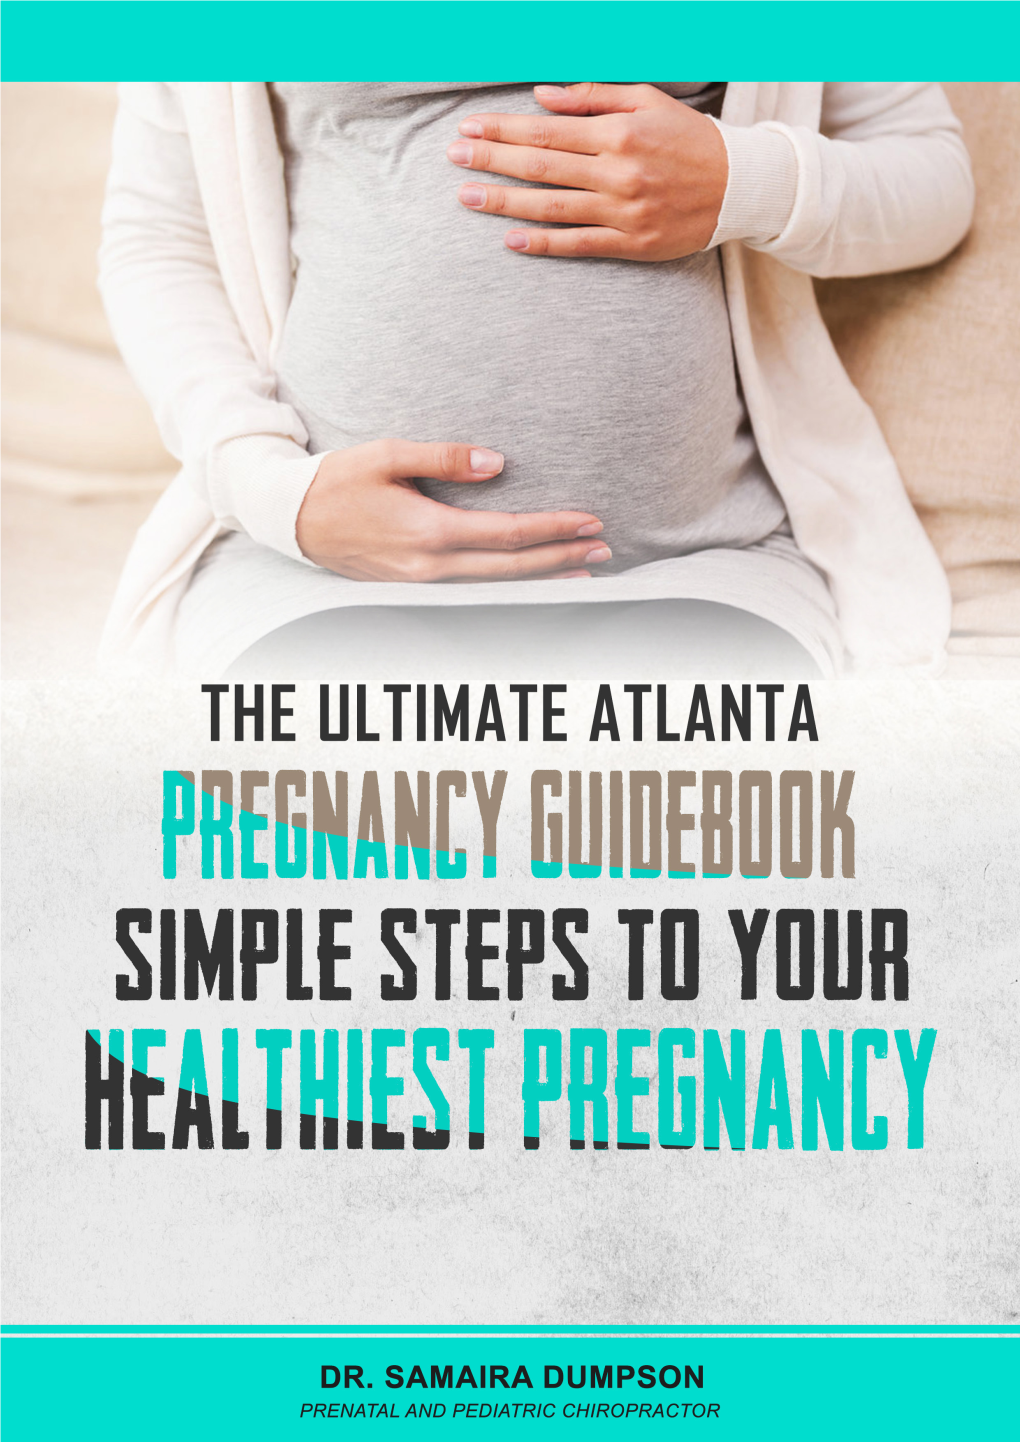 Pregnancy Guidebook: Simple Steps to Your Healthiest